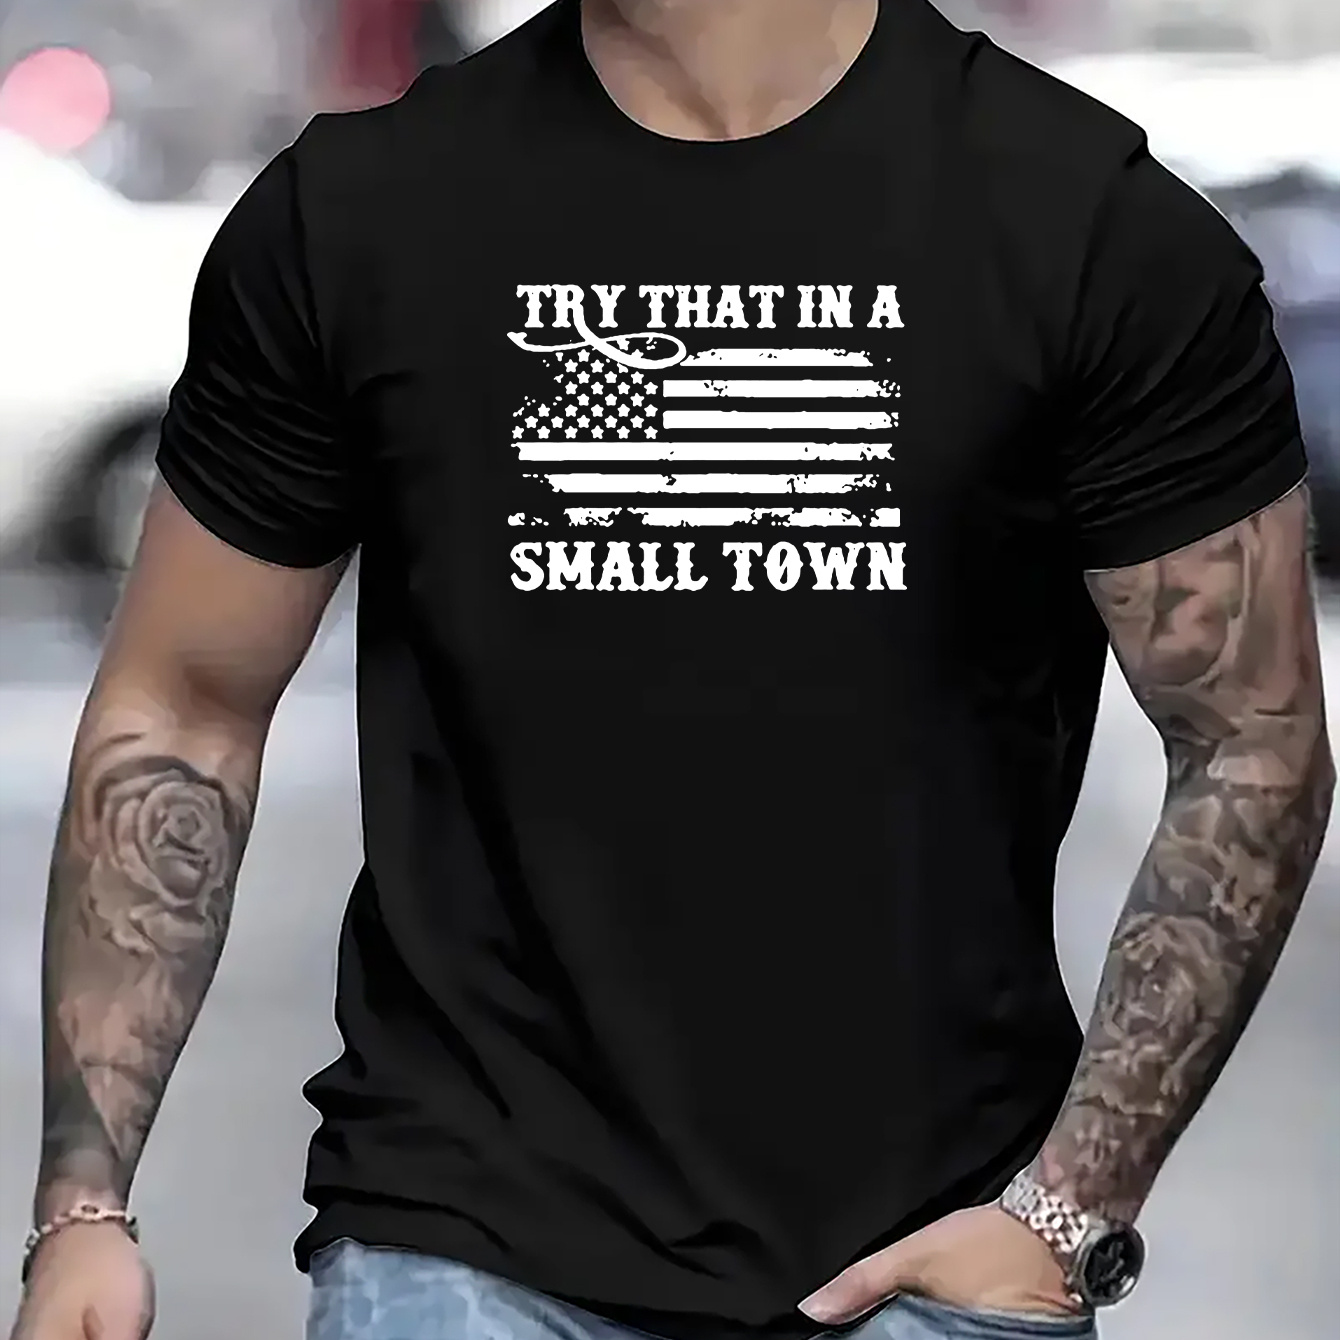 

Try That In A Small Town Print T Shirt, Tees For Men, Casual Short Sleeve T-shirt For Summer